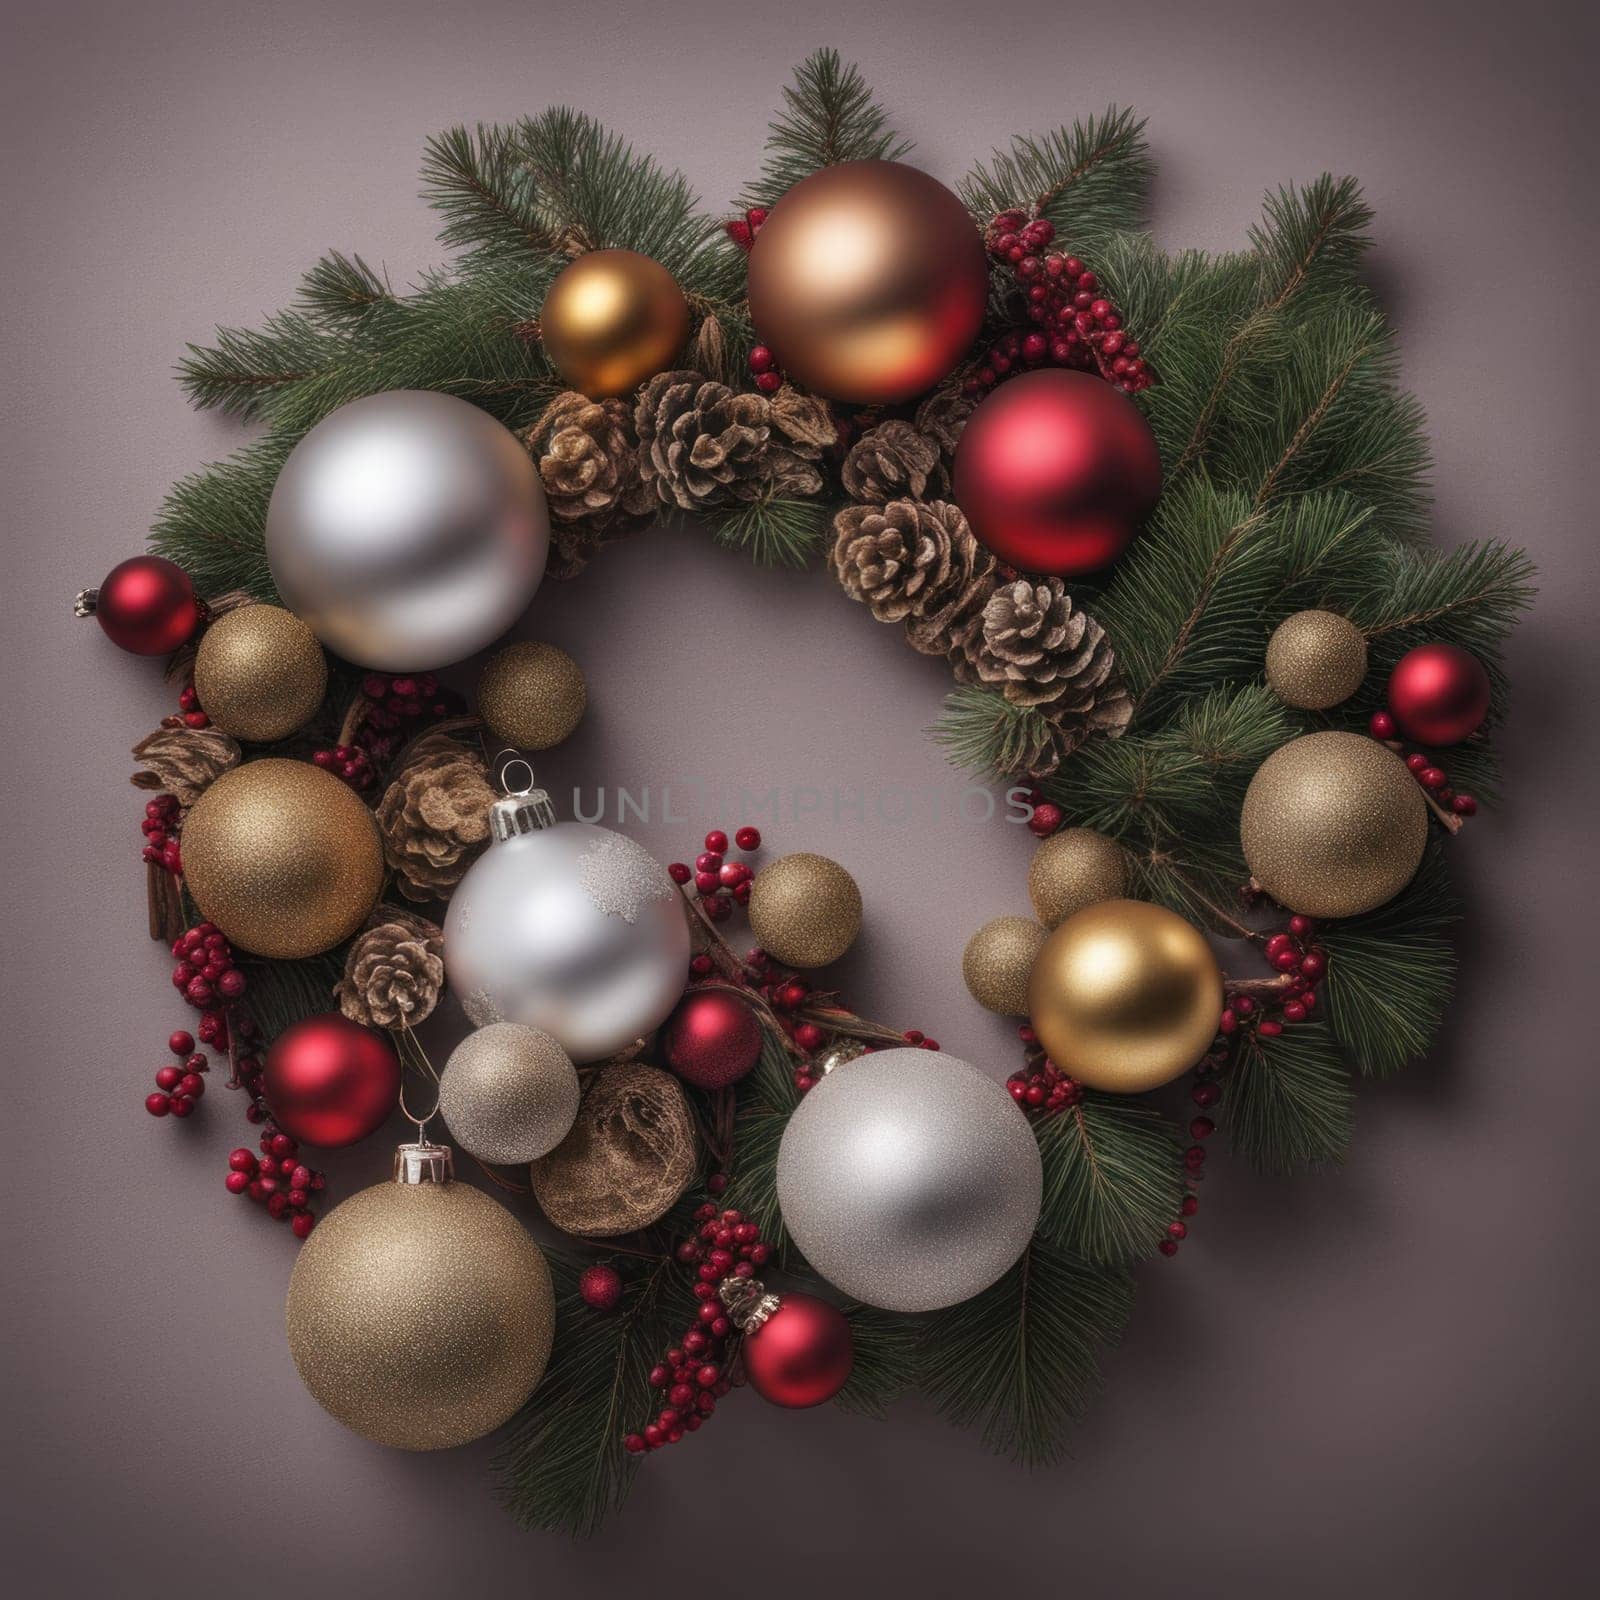 Close-UP of Christmas Tree, Gold and Silver Ornaments against a Defocused Lights Background